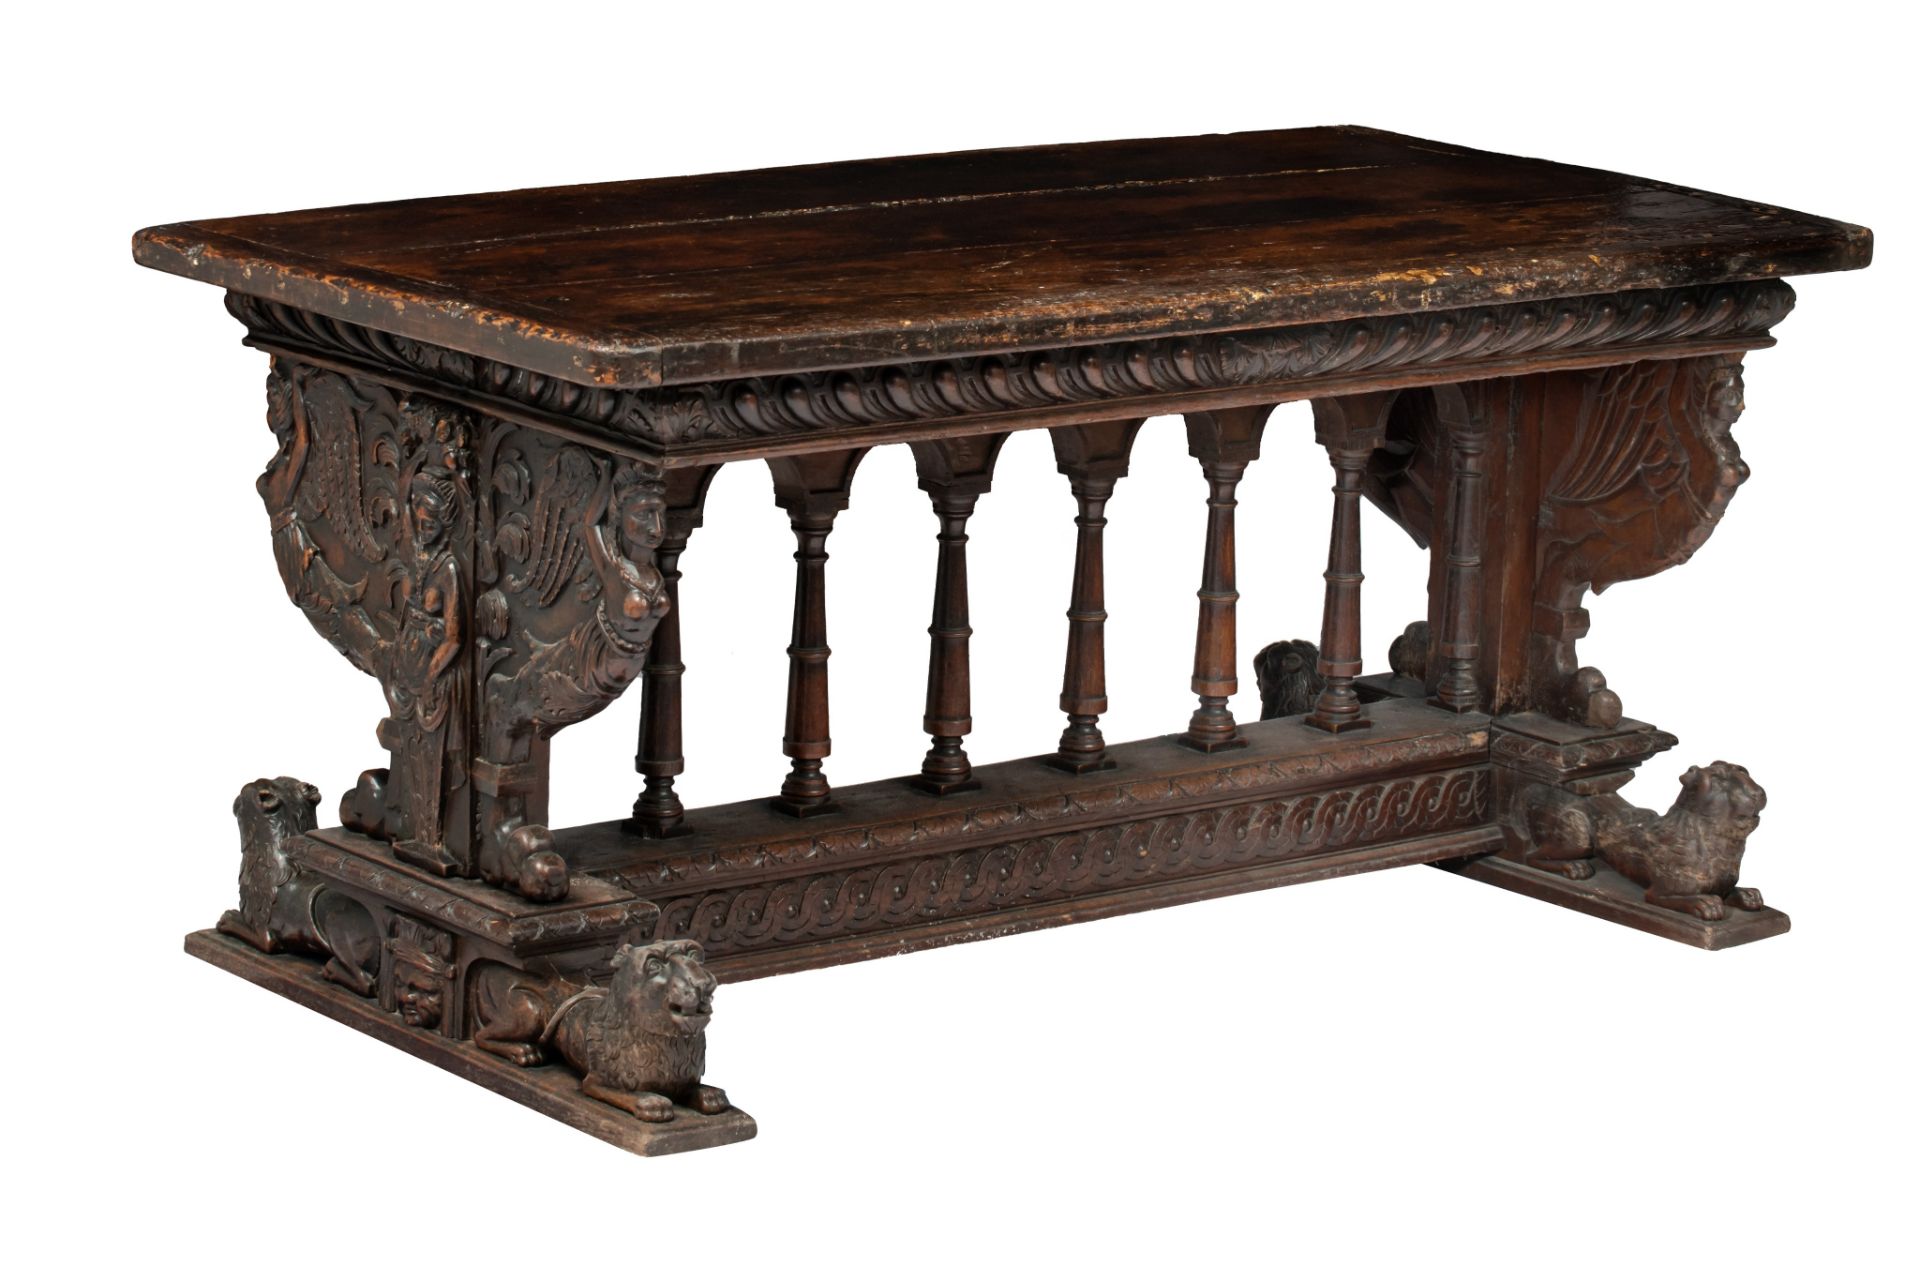 An exceptional Italian Renaissance carved walnut centre table, 16th/17thC, H 82 - W 165 - D 86,5 cm